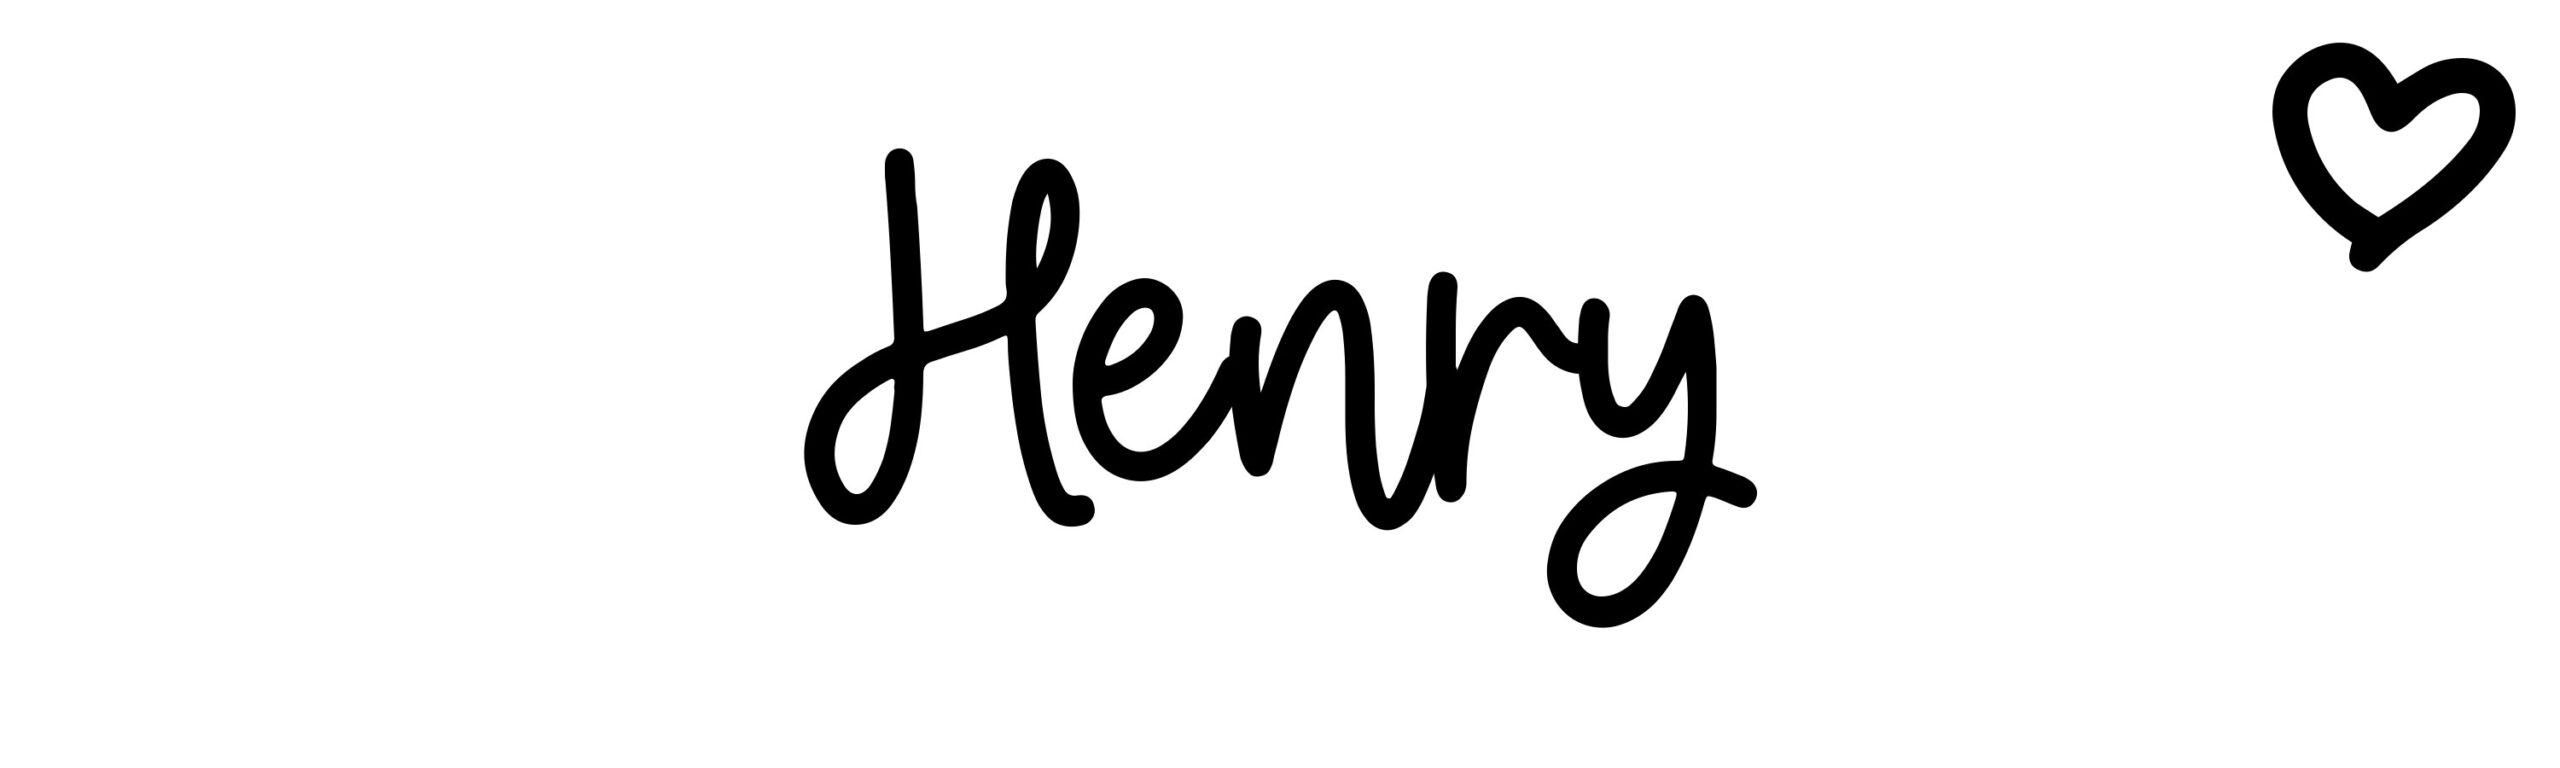 Henry - Name meaning, origin, variations and more